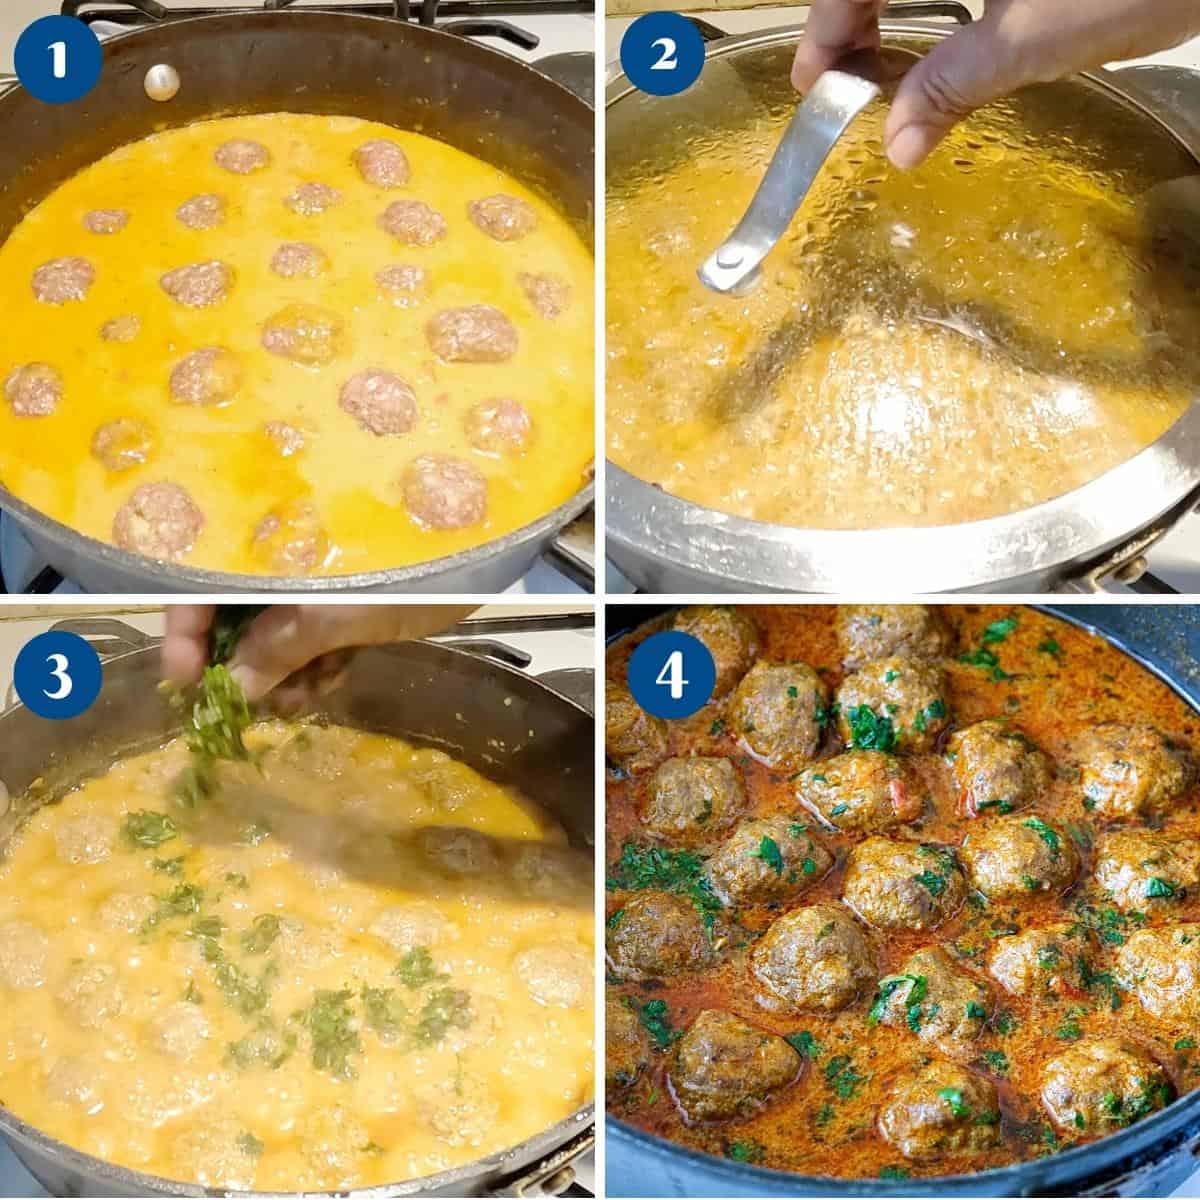 Progress pictures for cooking meatballs.